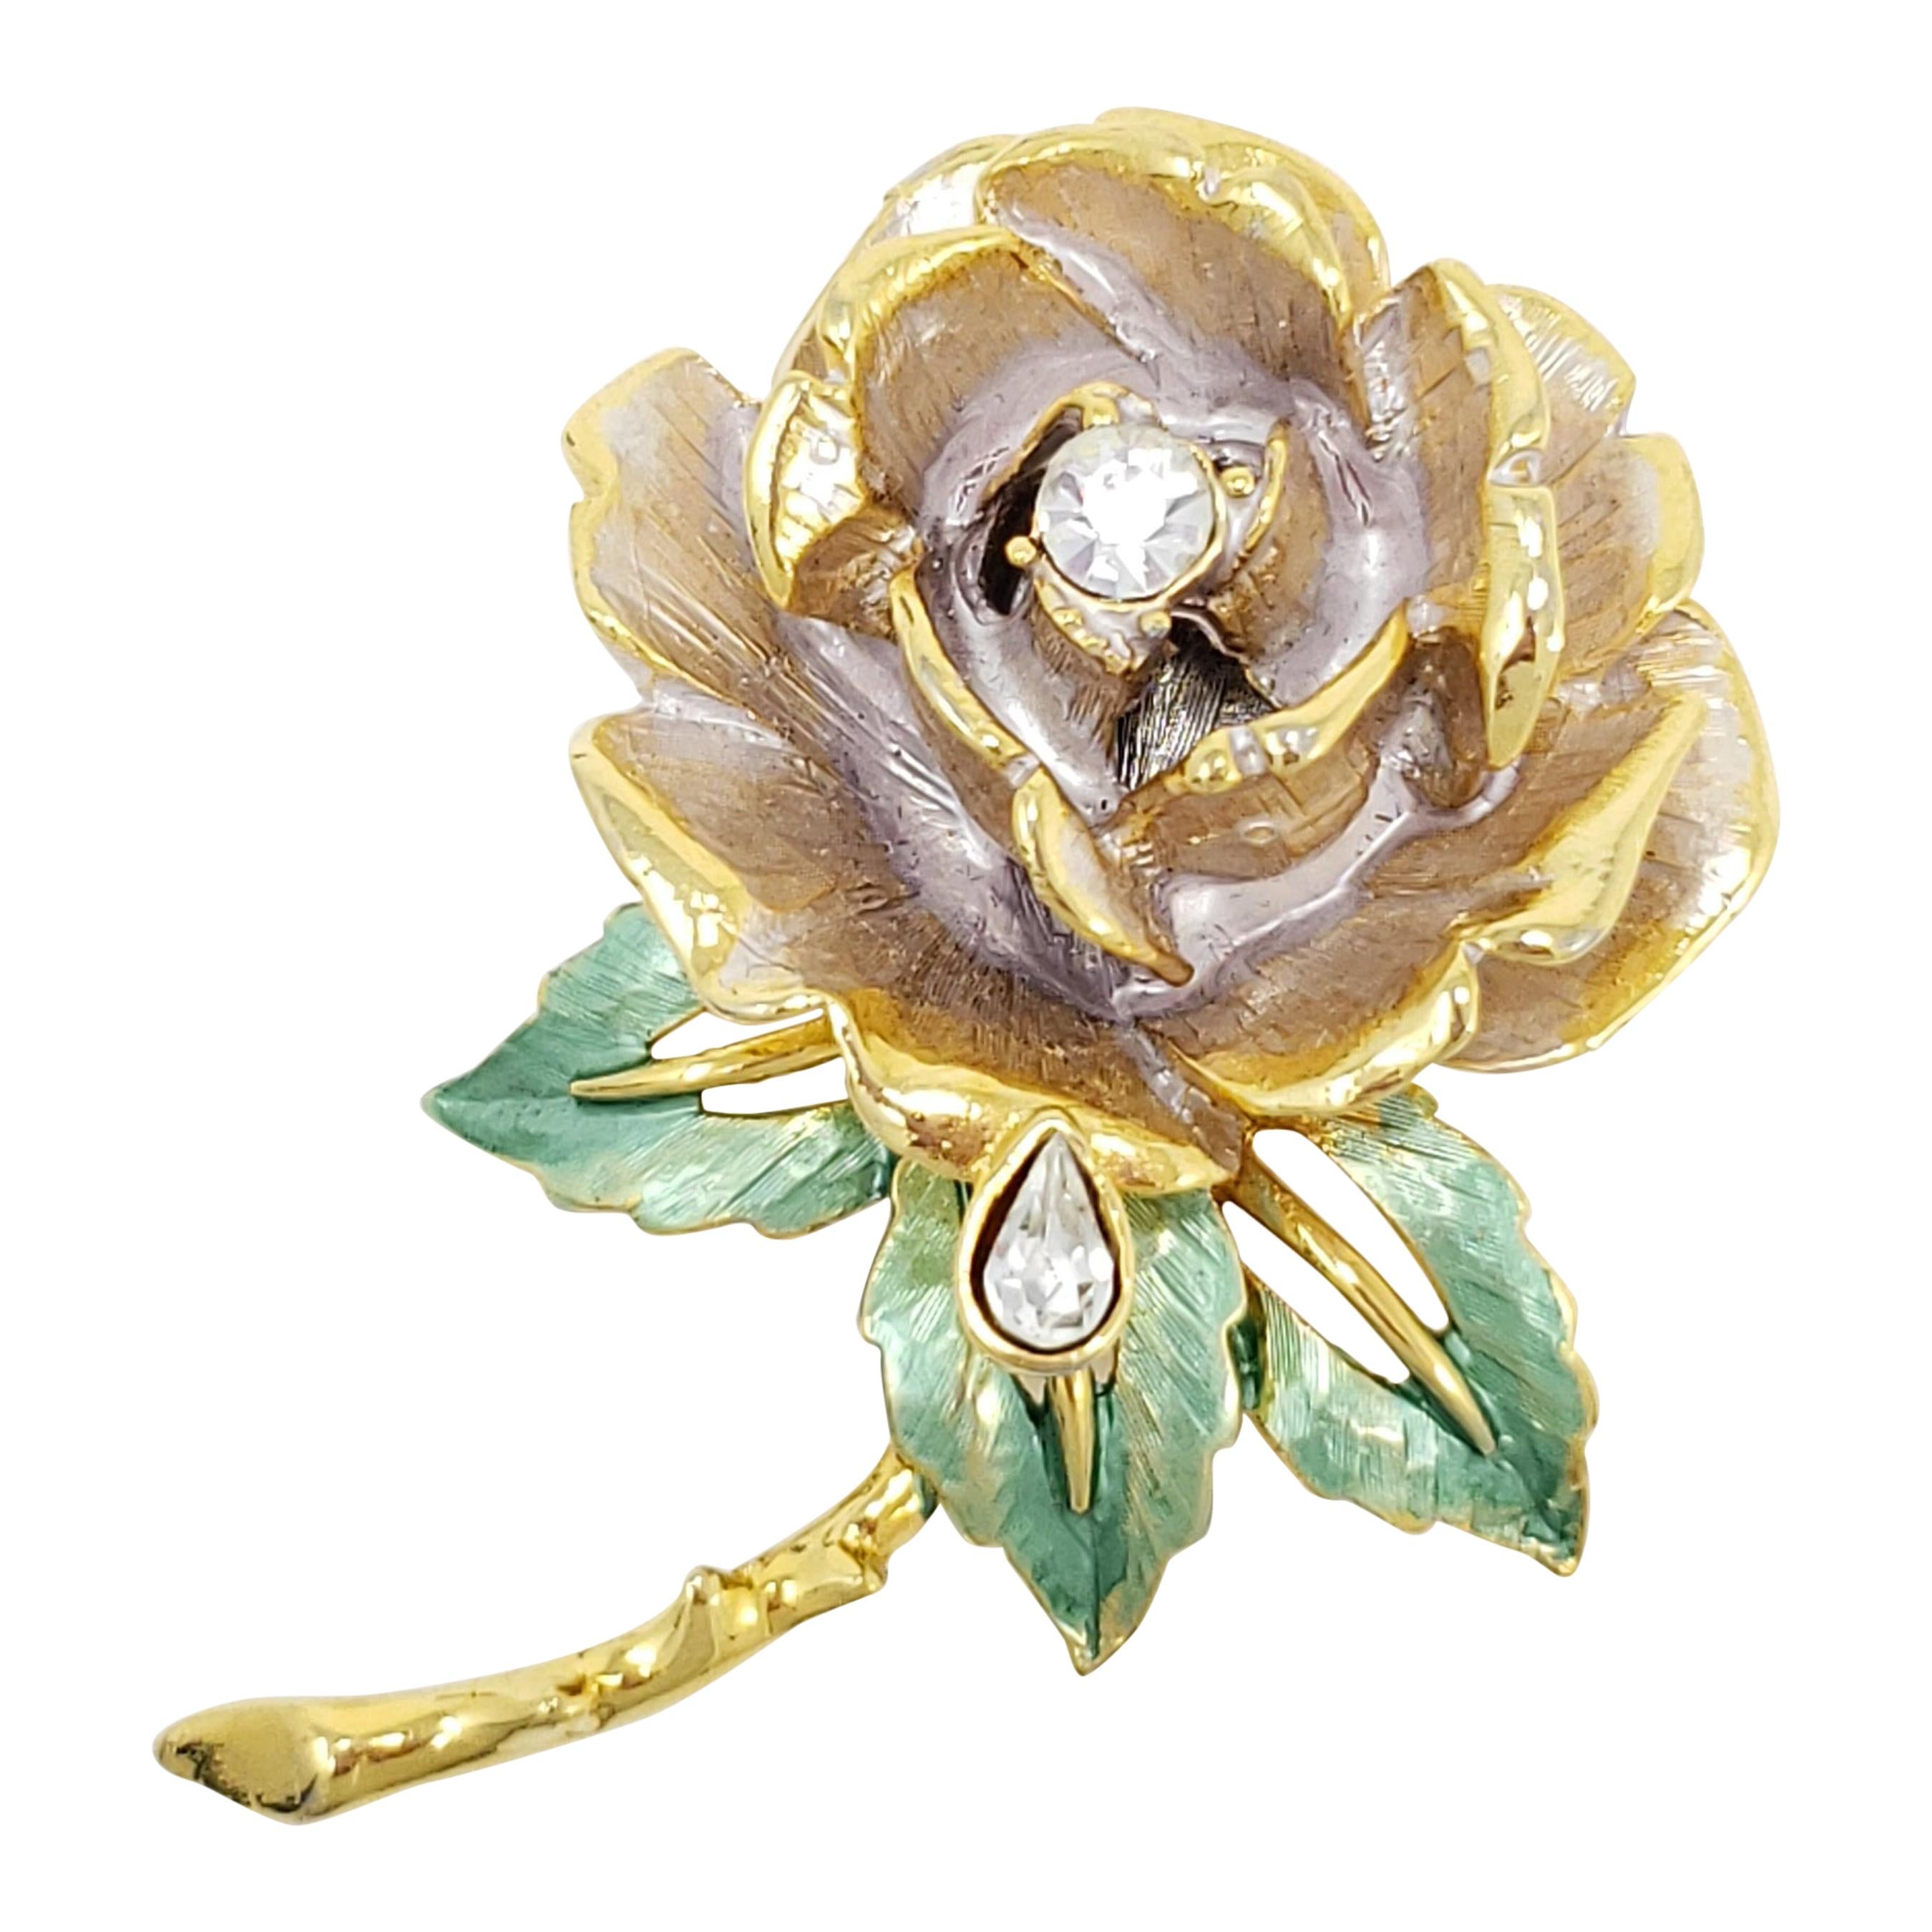 Graziano Princess Diana 1997 England Rose Brooch, Enamel, Gold-Plated For Sale